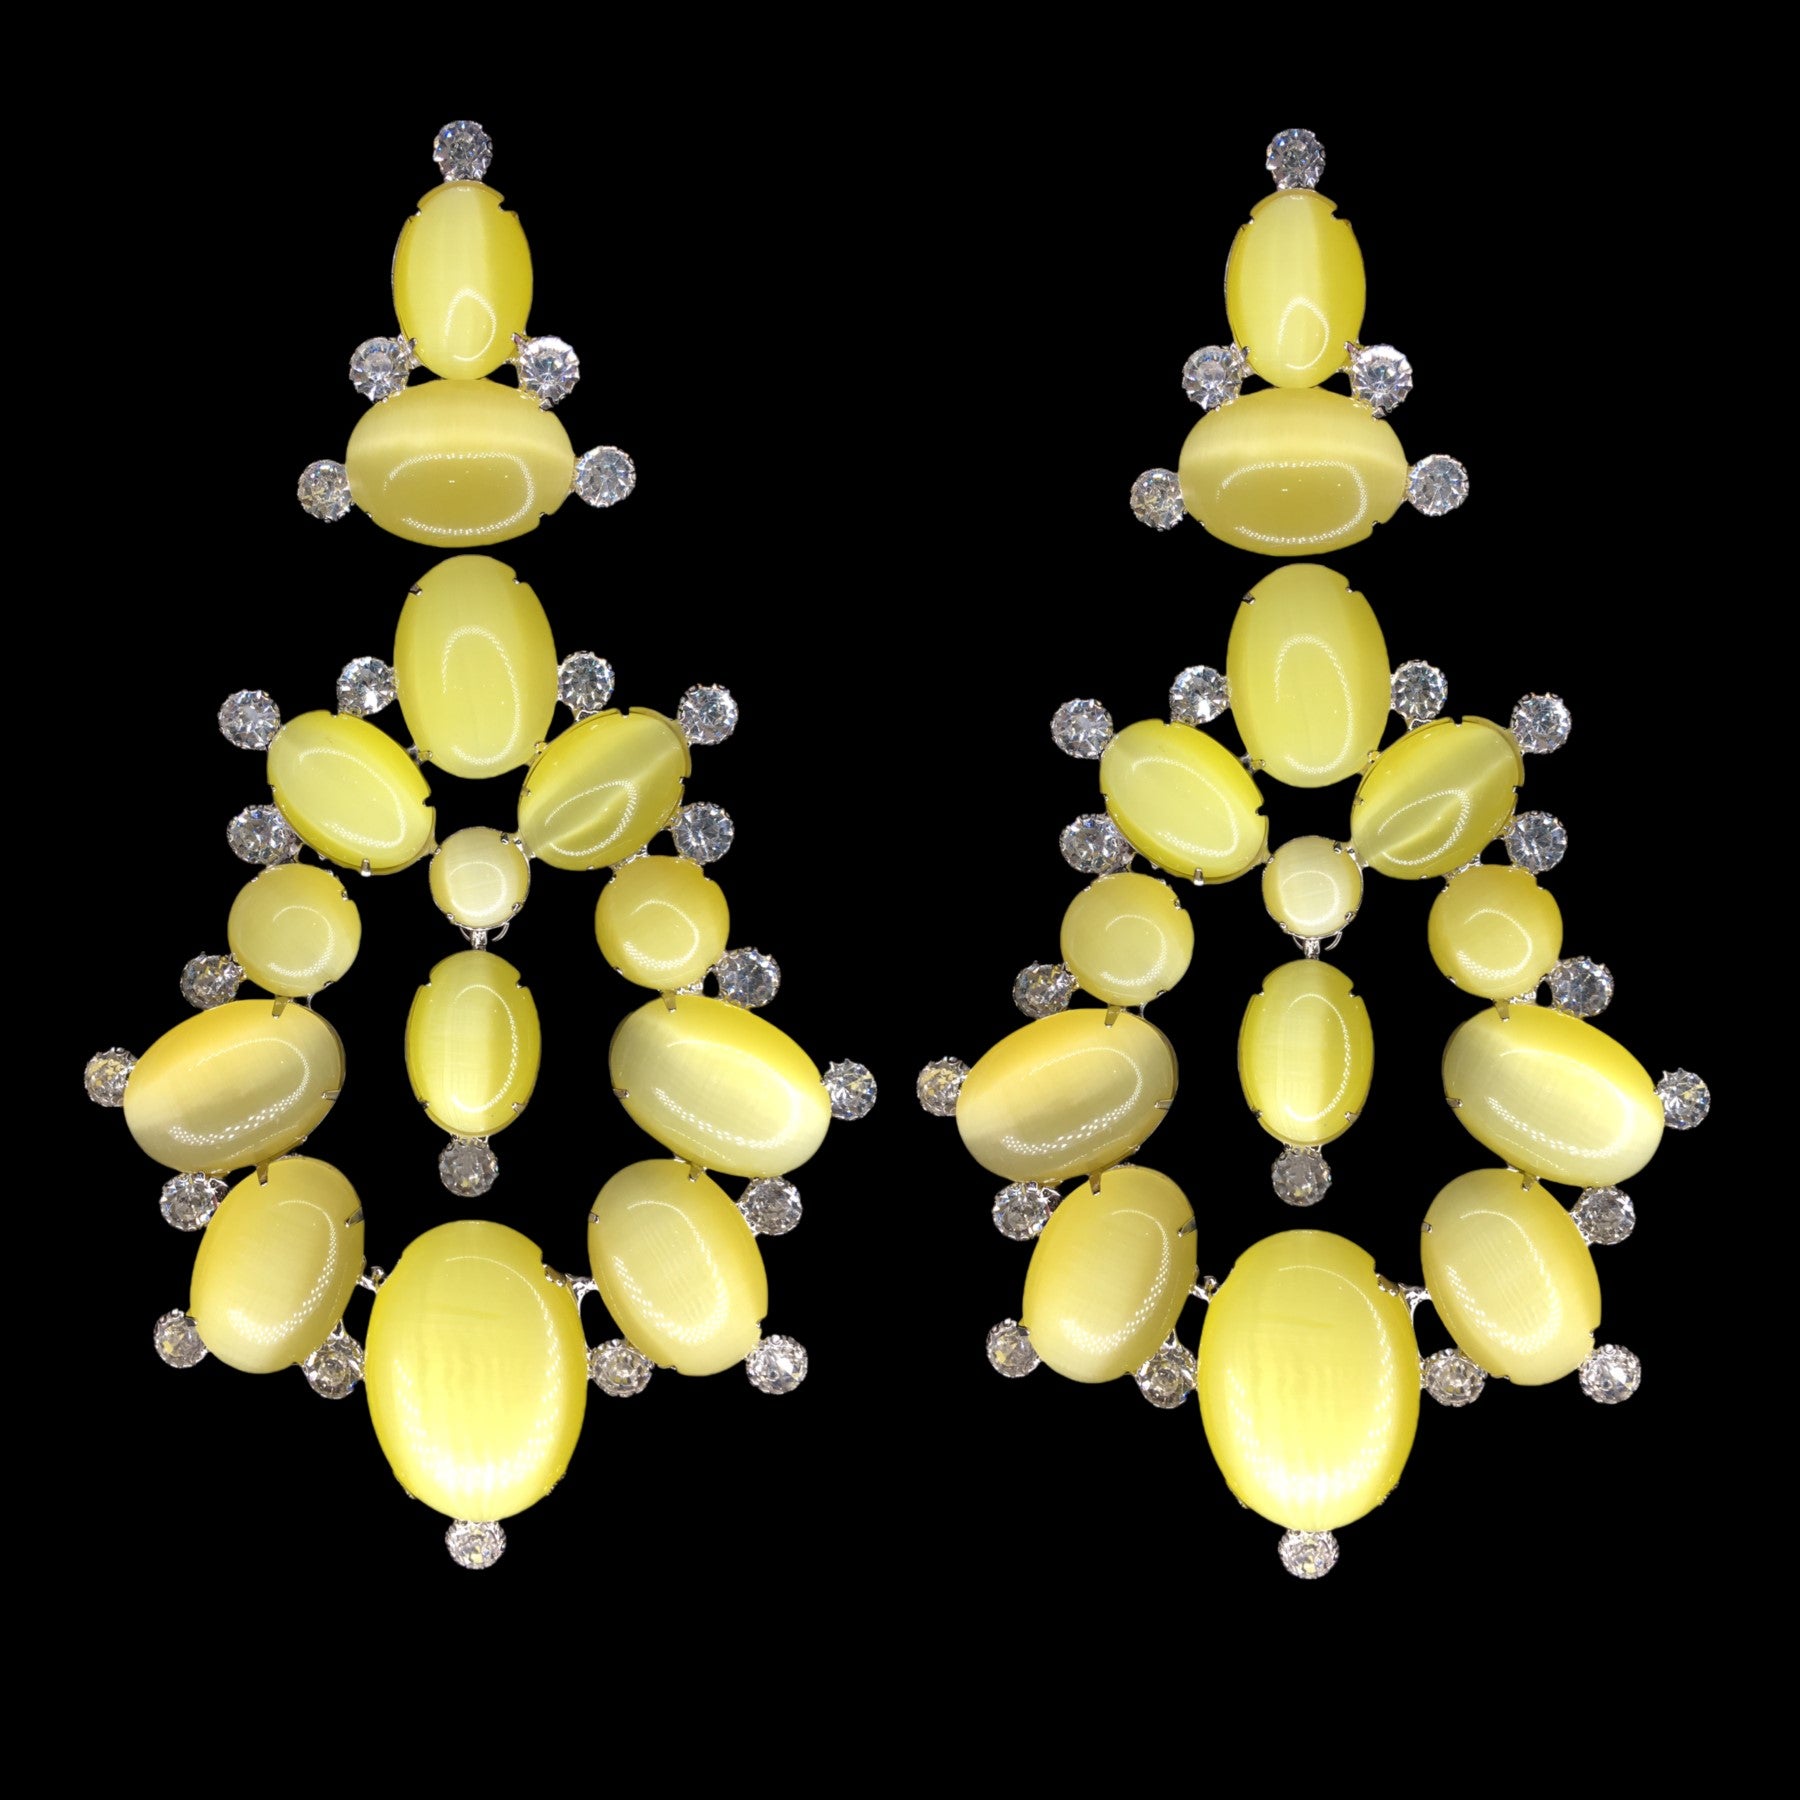 Earrings Large Clear and Yellow Crystals with Cabochons